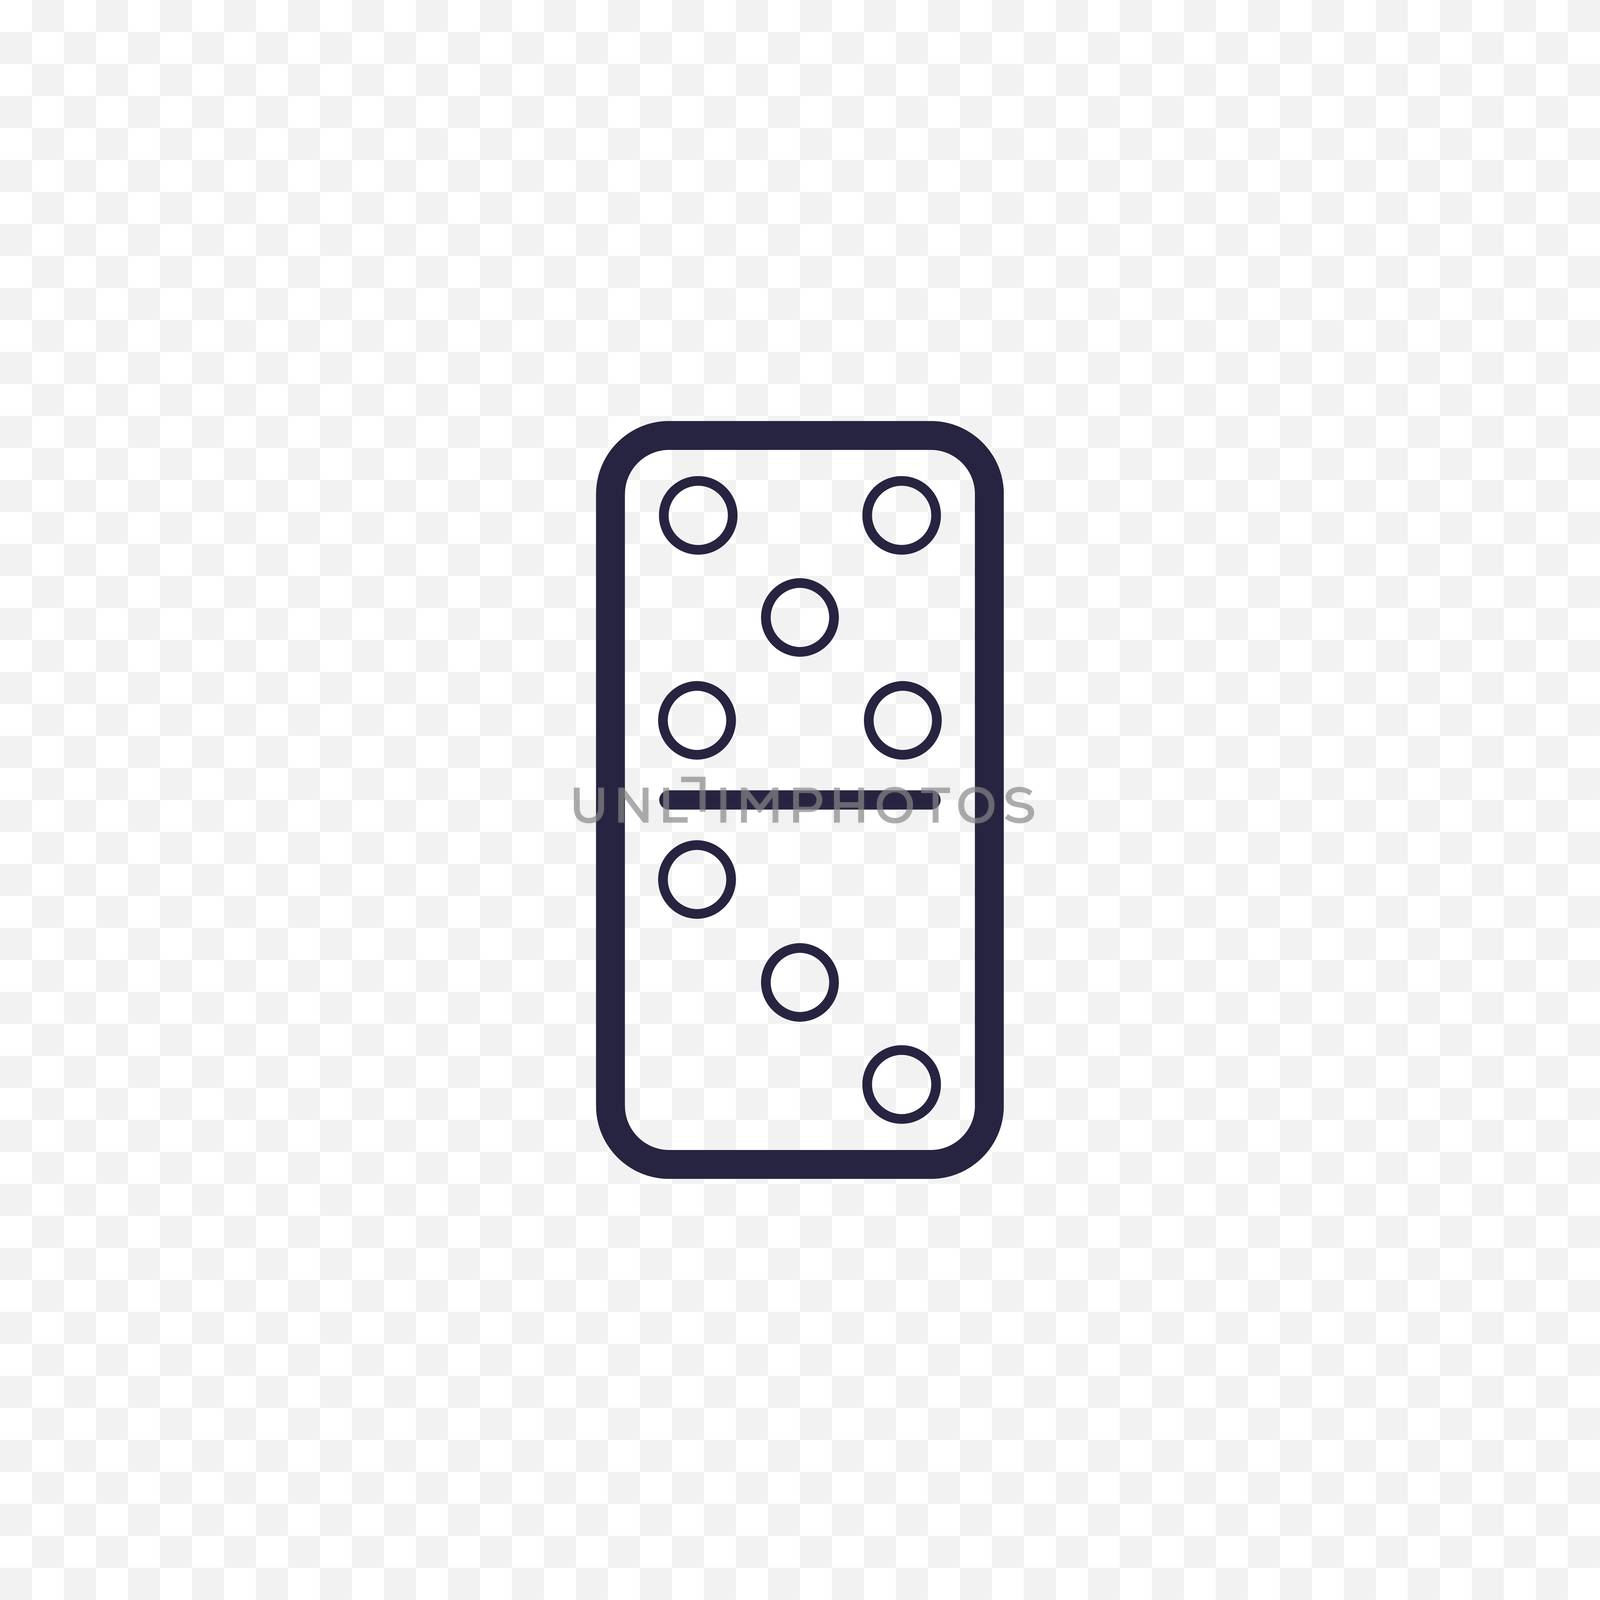 Domino game simple line icon. Game thin linear signs. Outline concept for websites, infographic, mobile app.